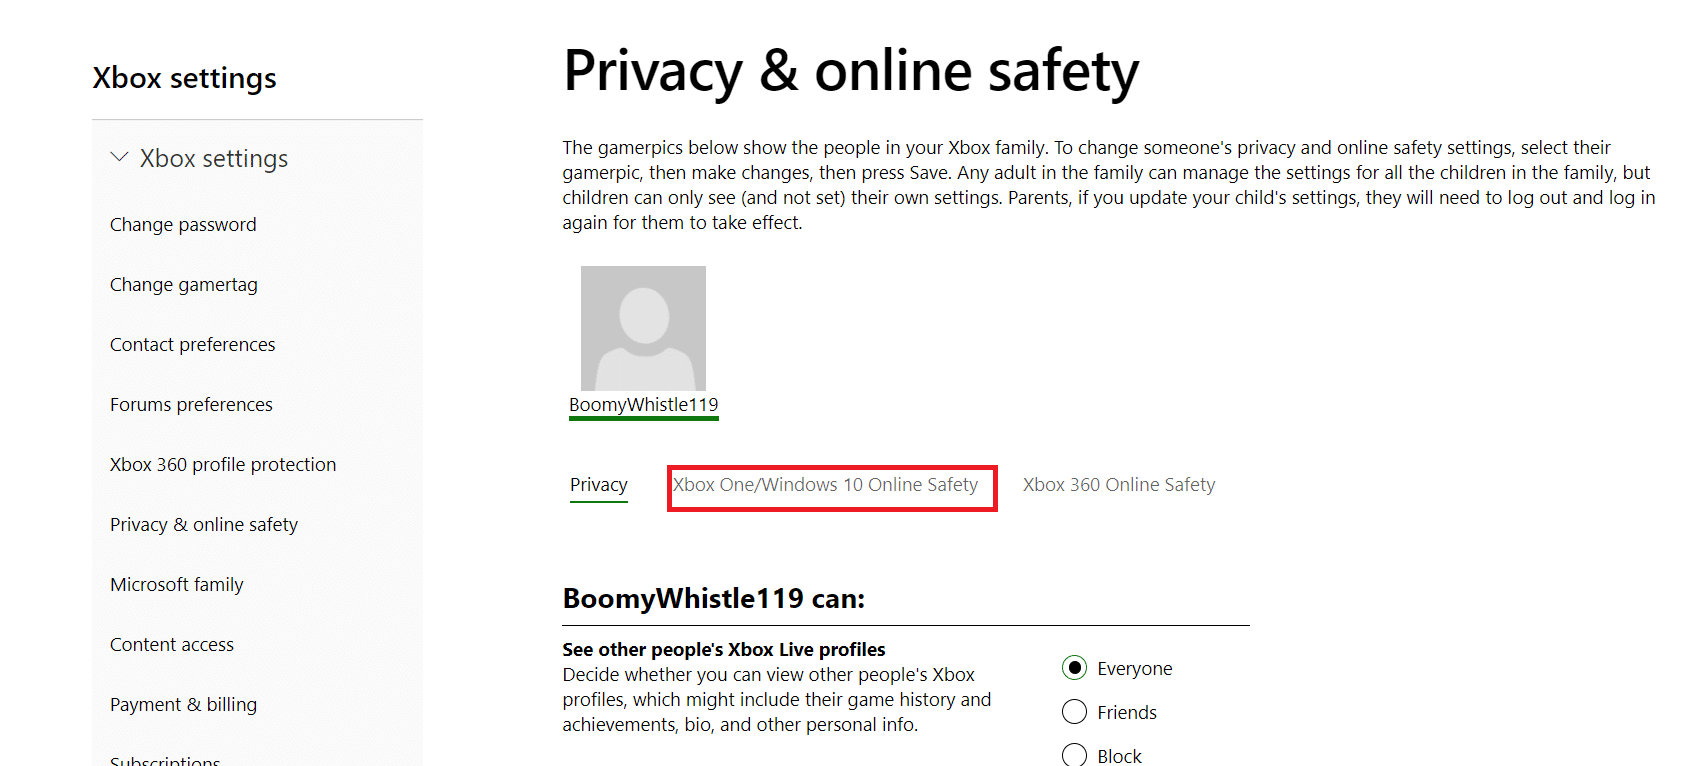 select the Xbox One or Windows 10 Online Safety tab